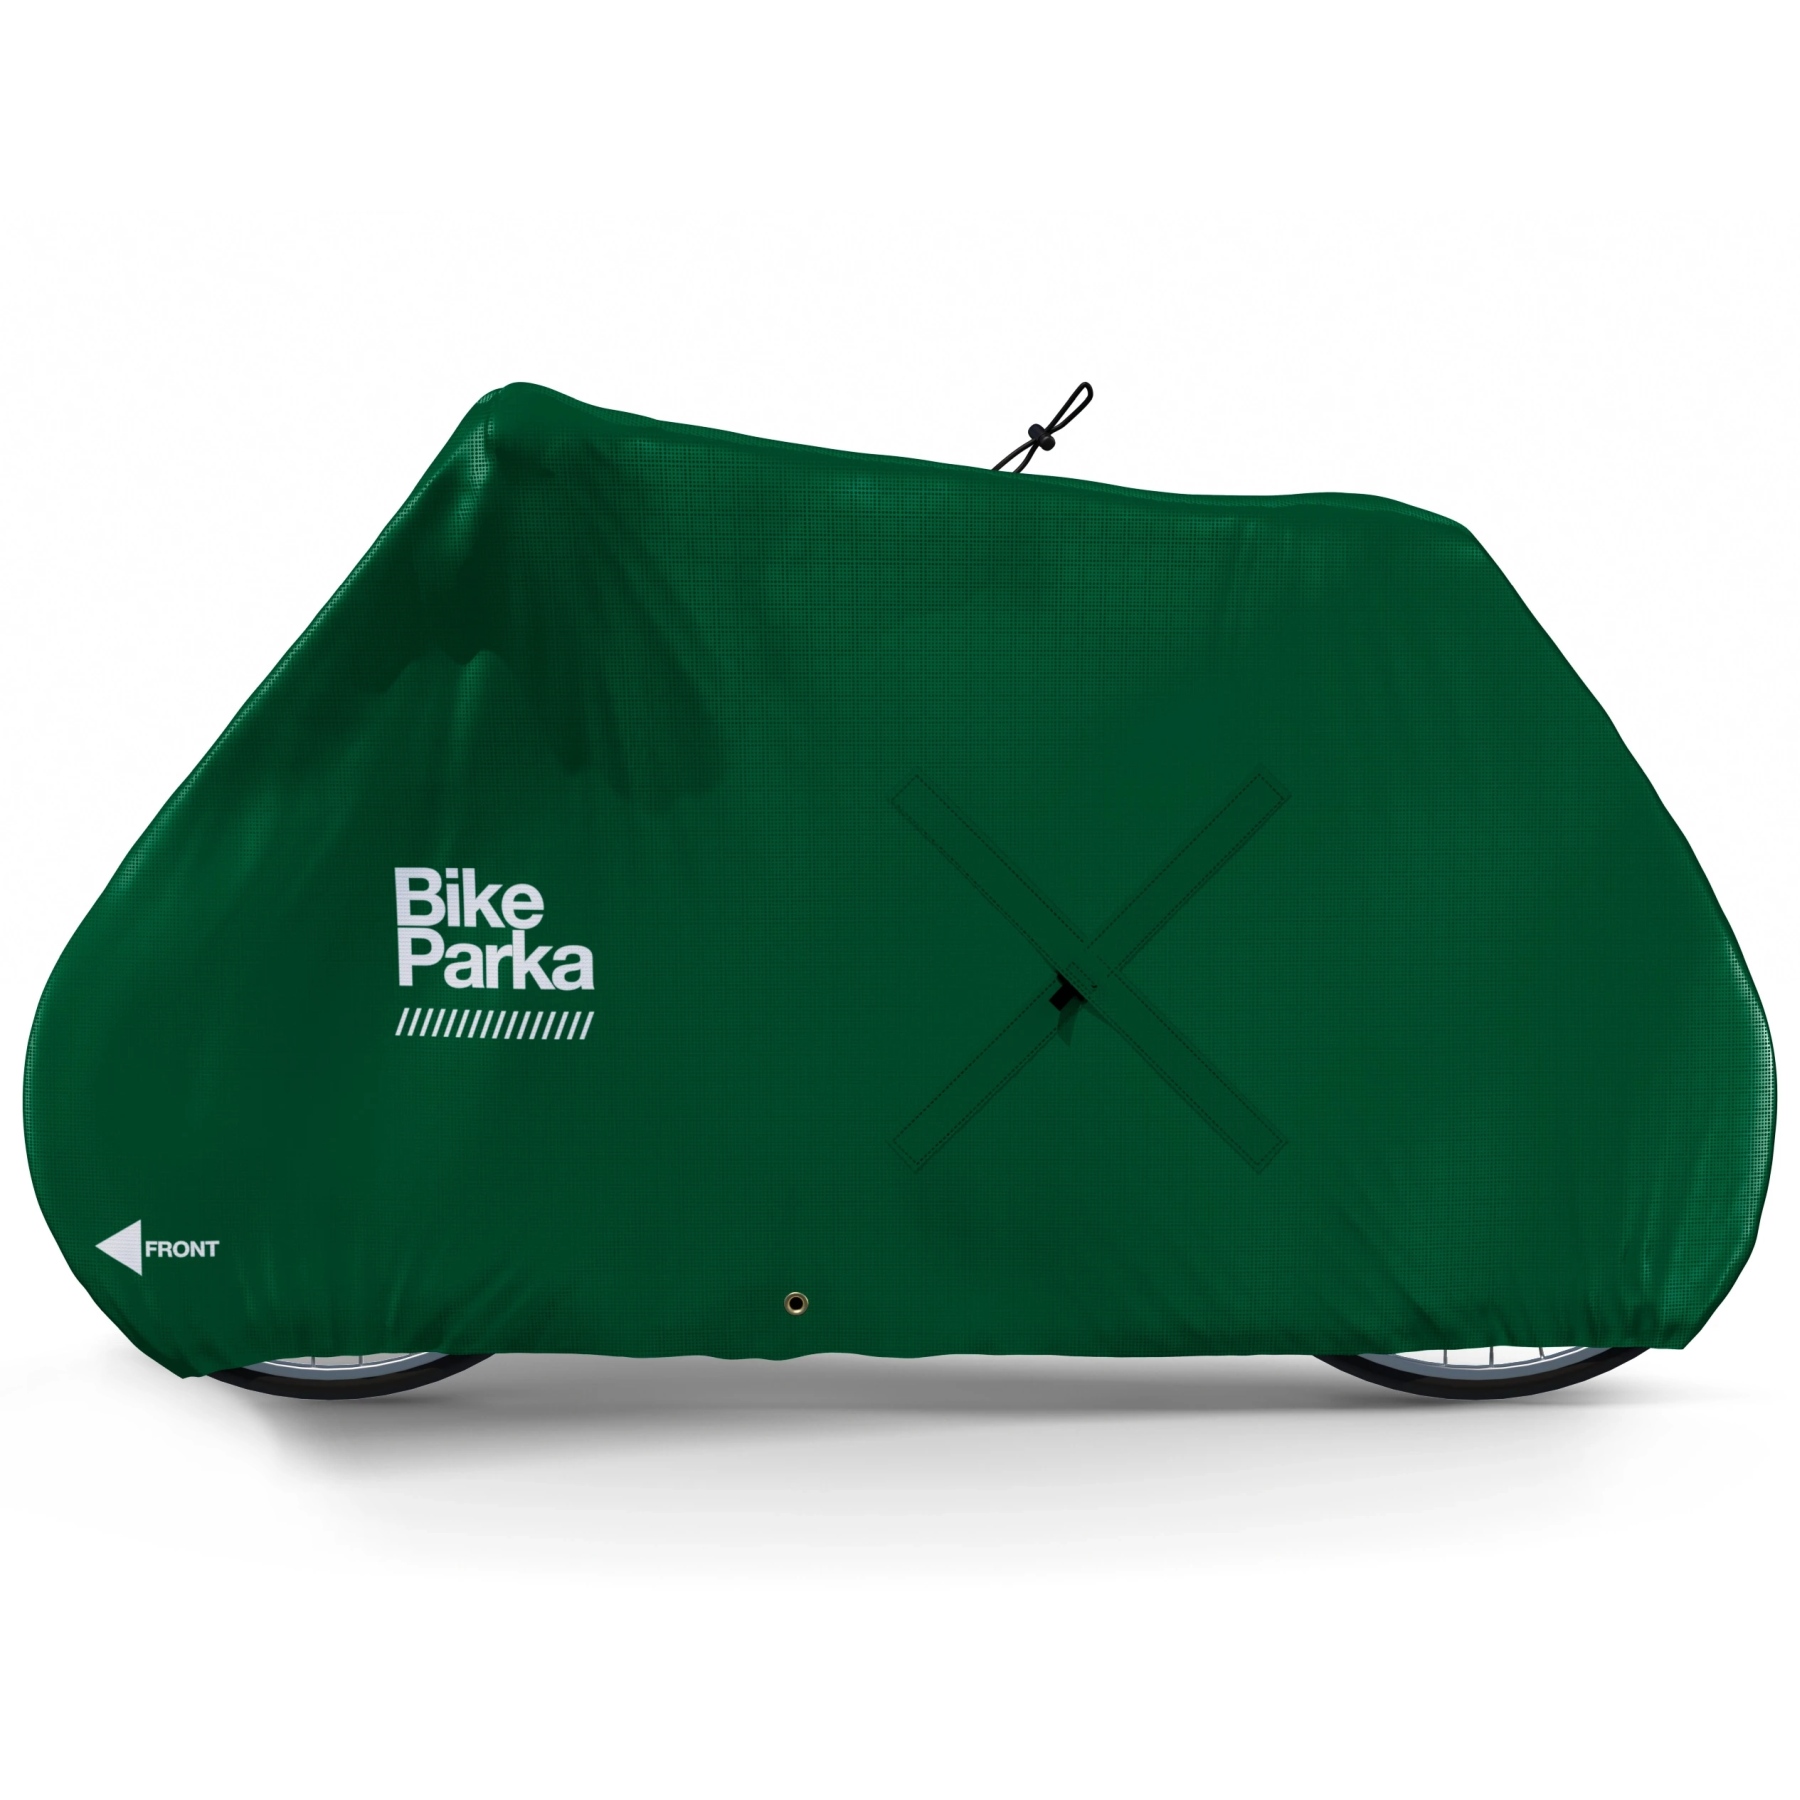 Productfoto van BikeParka Urban Bicycle Cover - Forest Green - 220x140cm